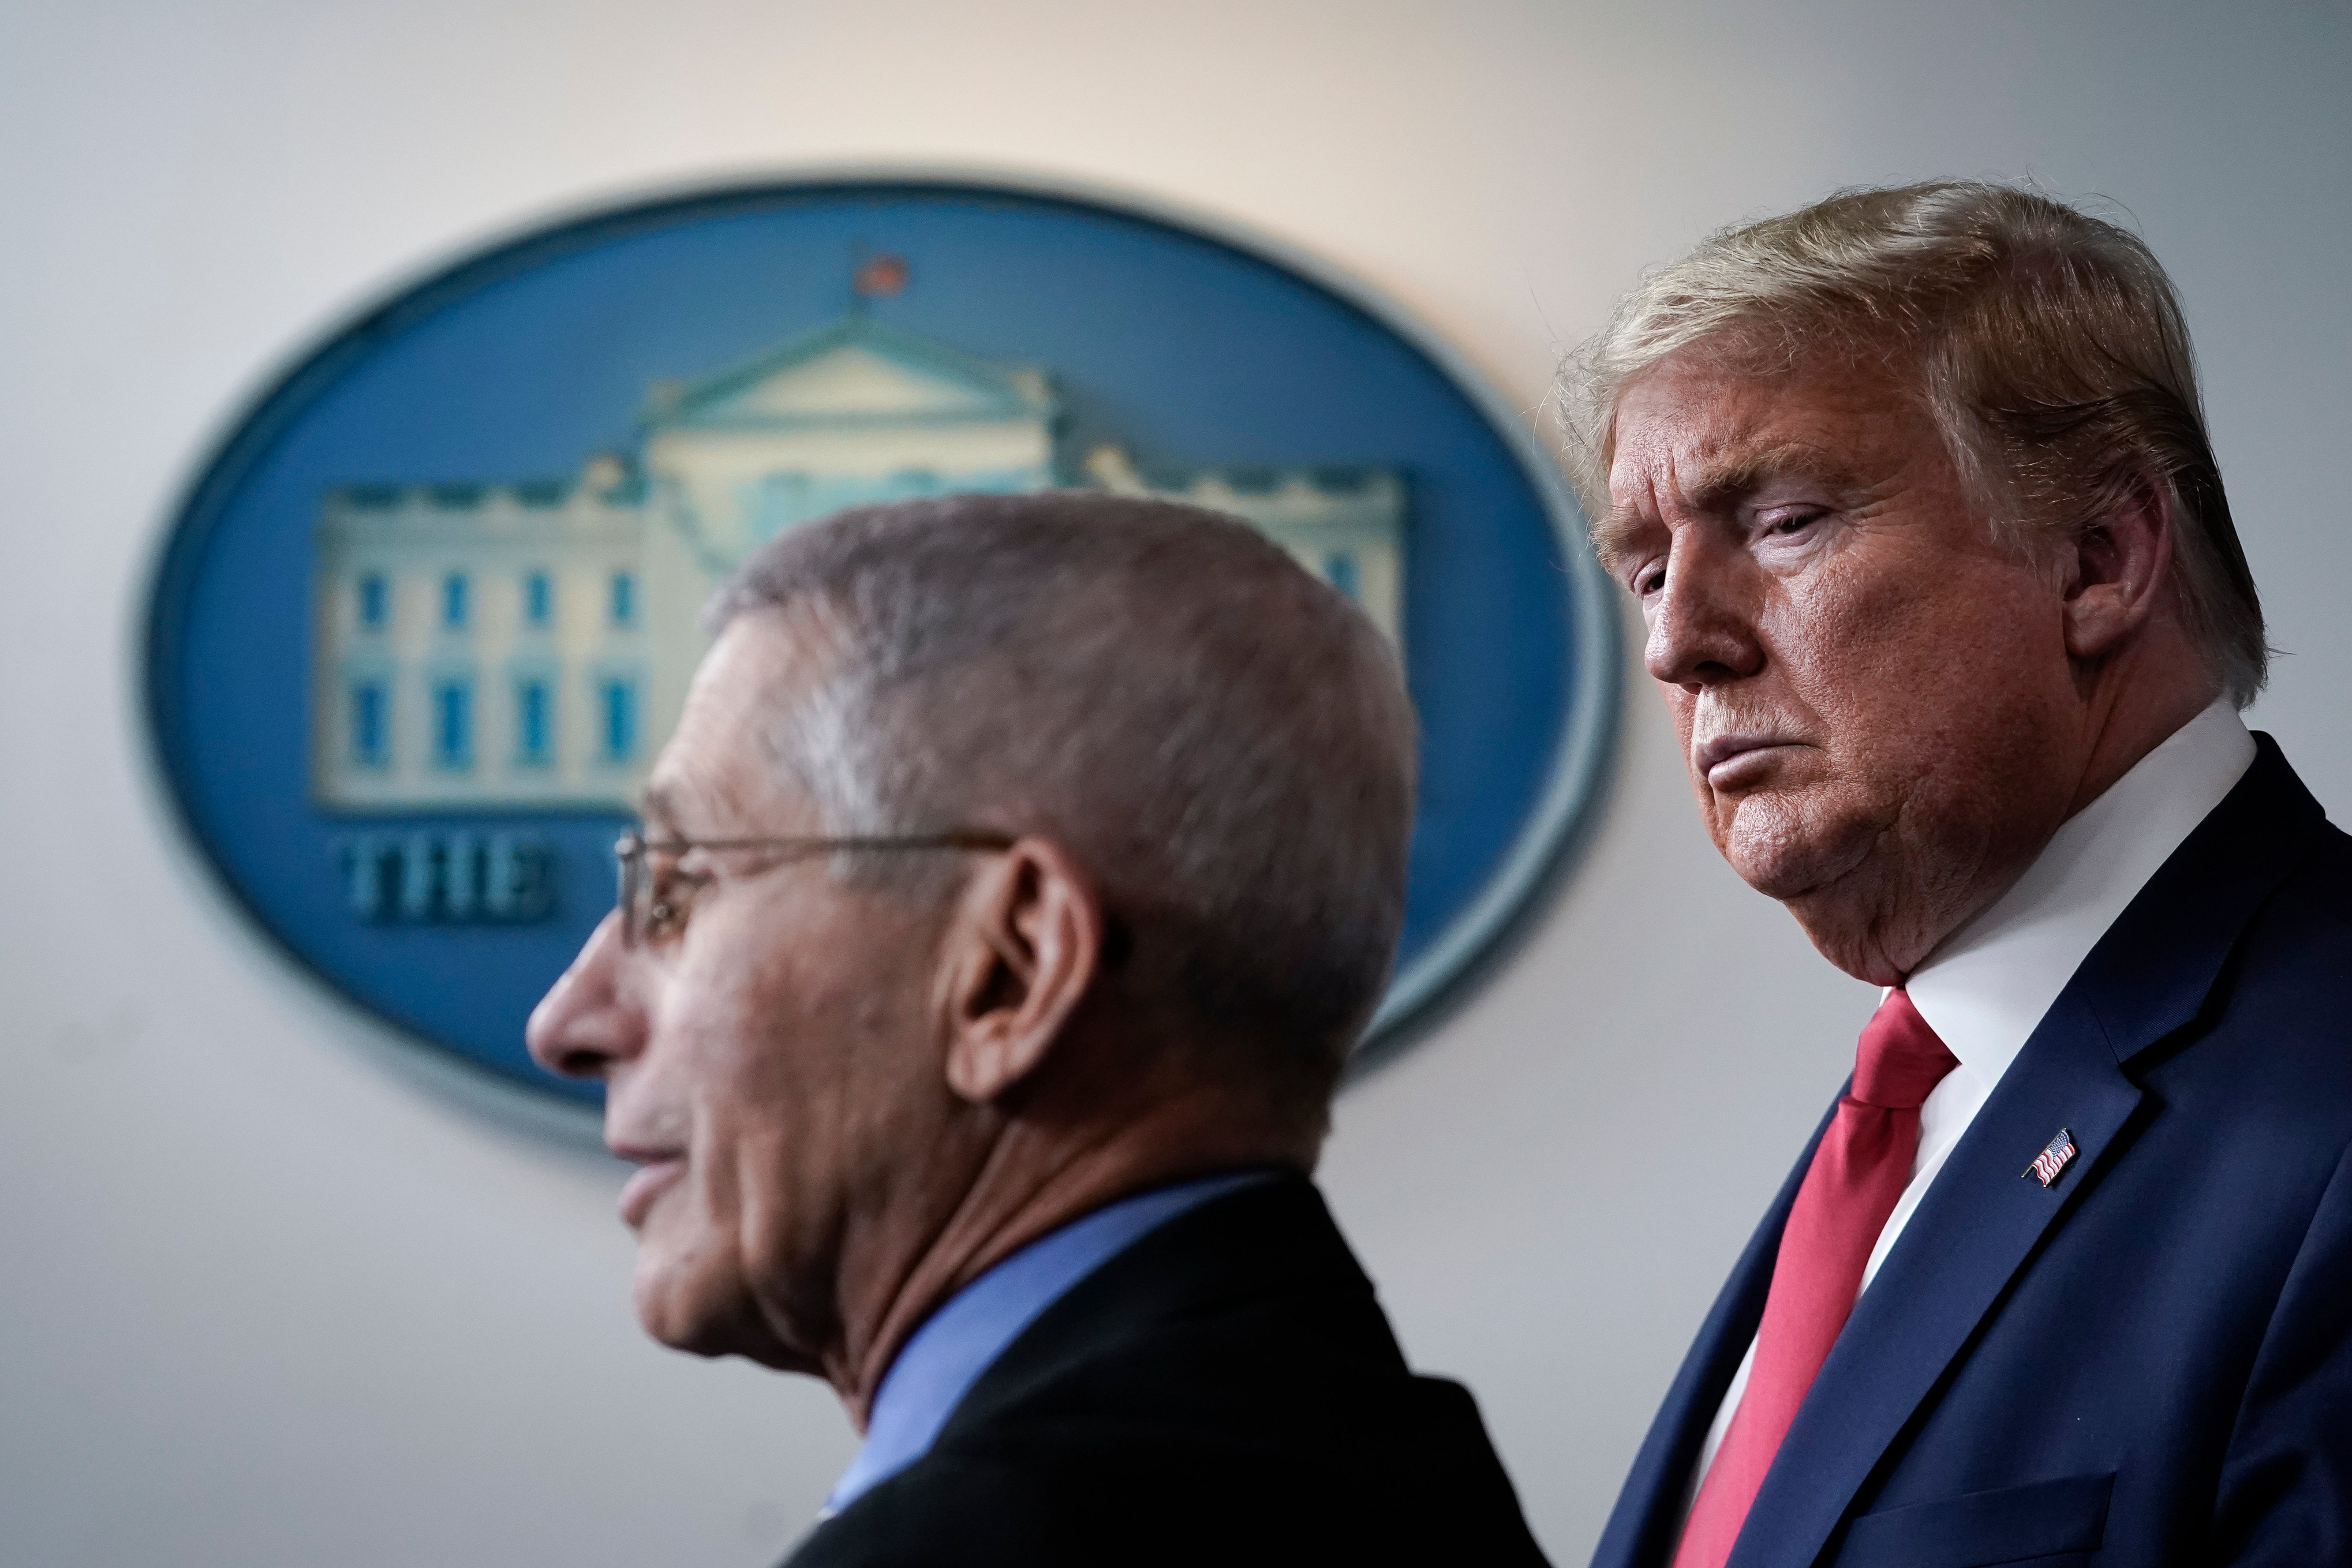 Anthony Fauci (left) and Donald Trump (right) stand together at a COVID-19 briefing at the White House. Fauci writes in a new book that his final conversation with Trump included the then-president calling Joe Biden “that f*****”